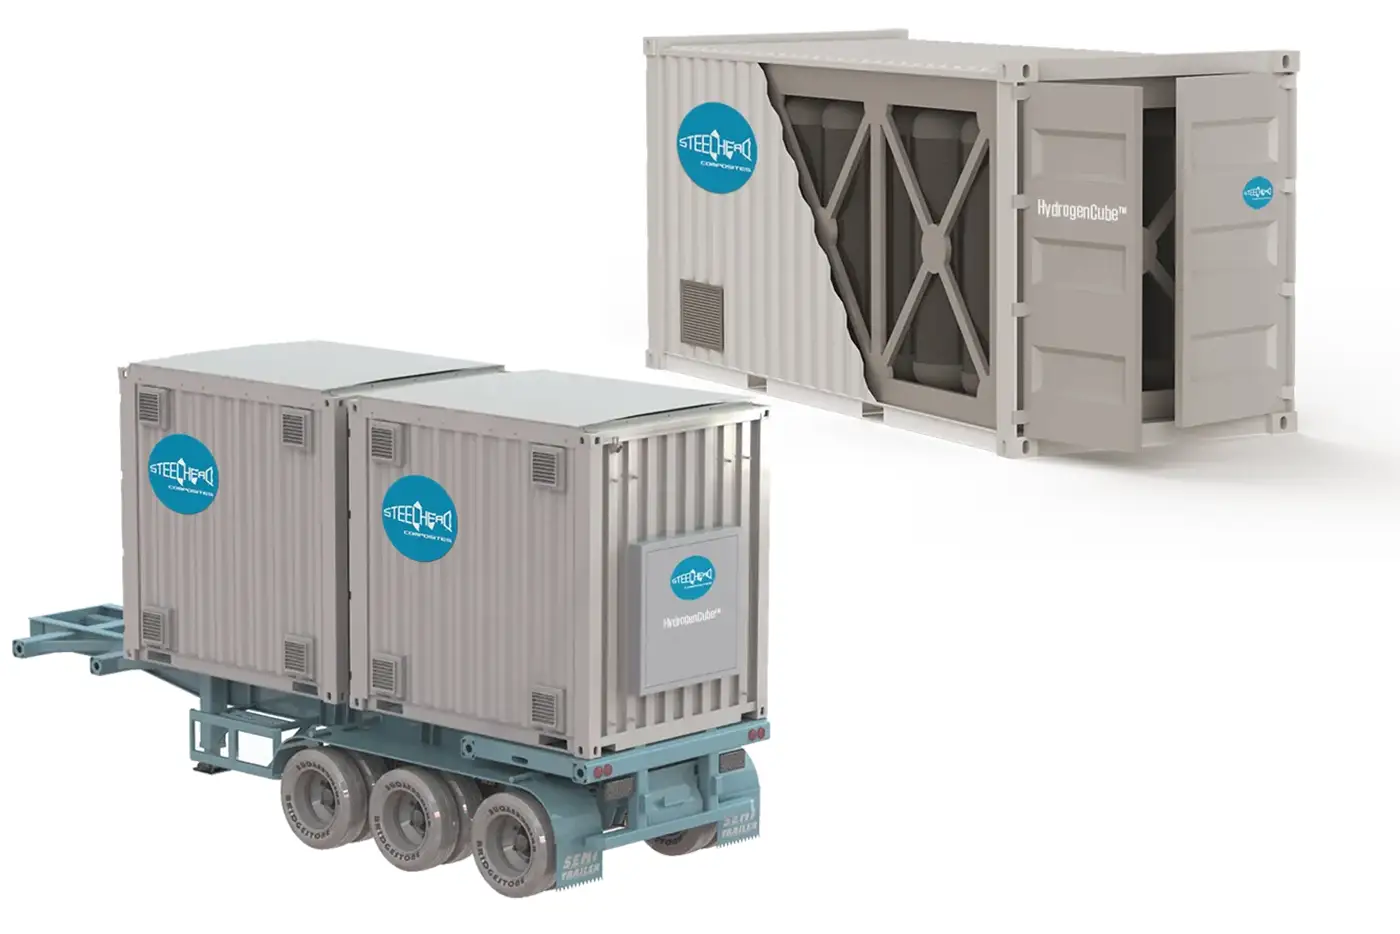 HydrogenCube™ Containerized Storage